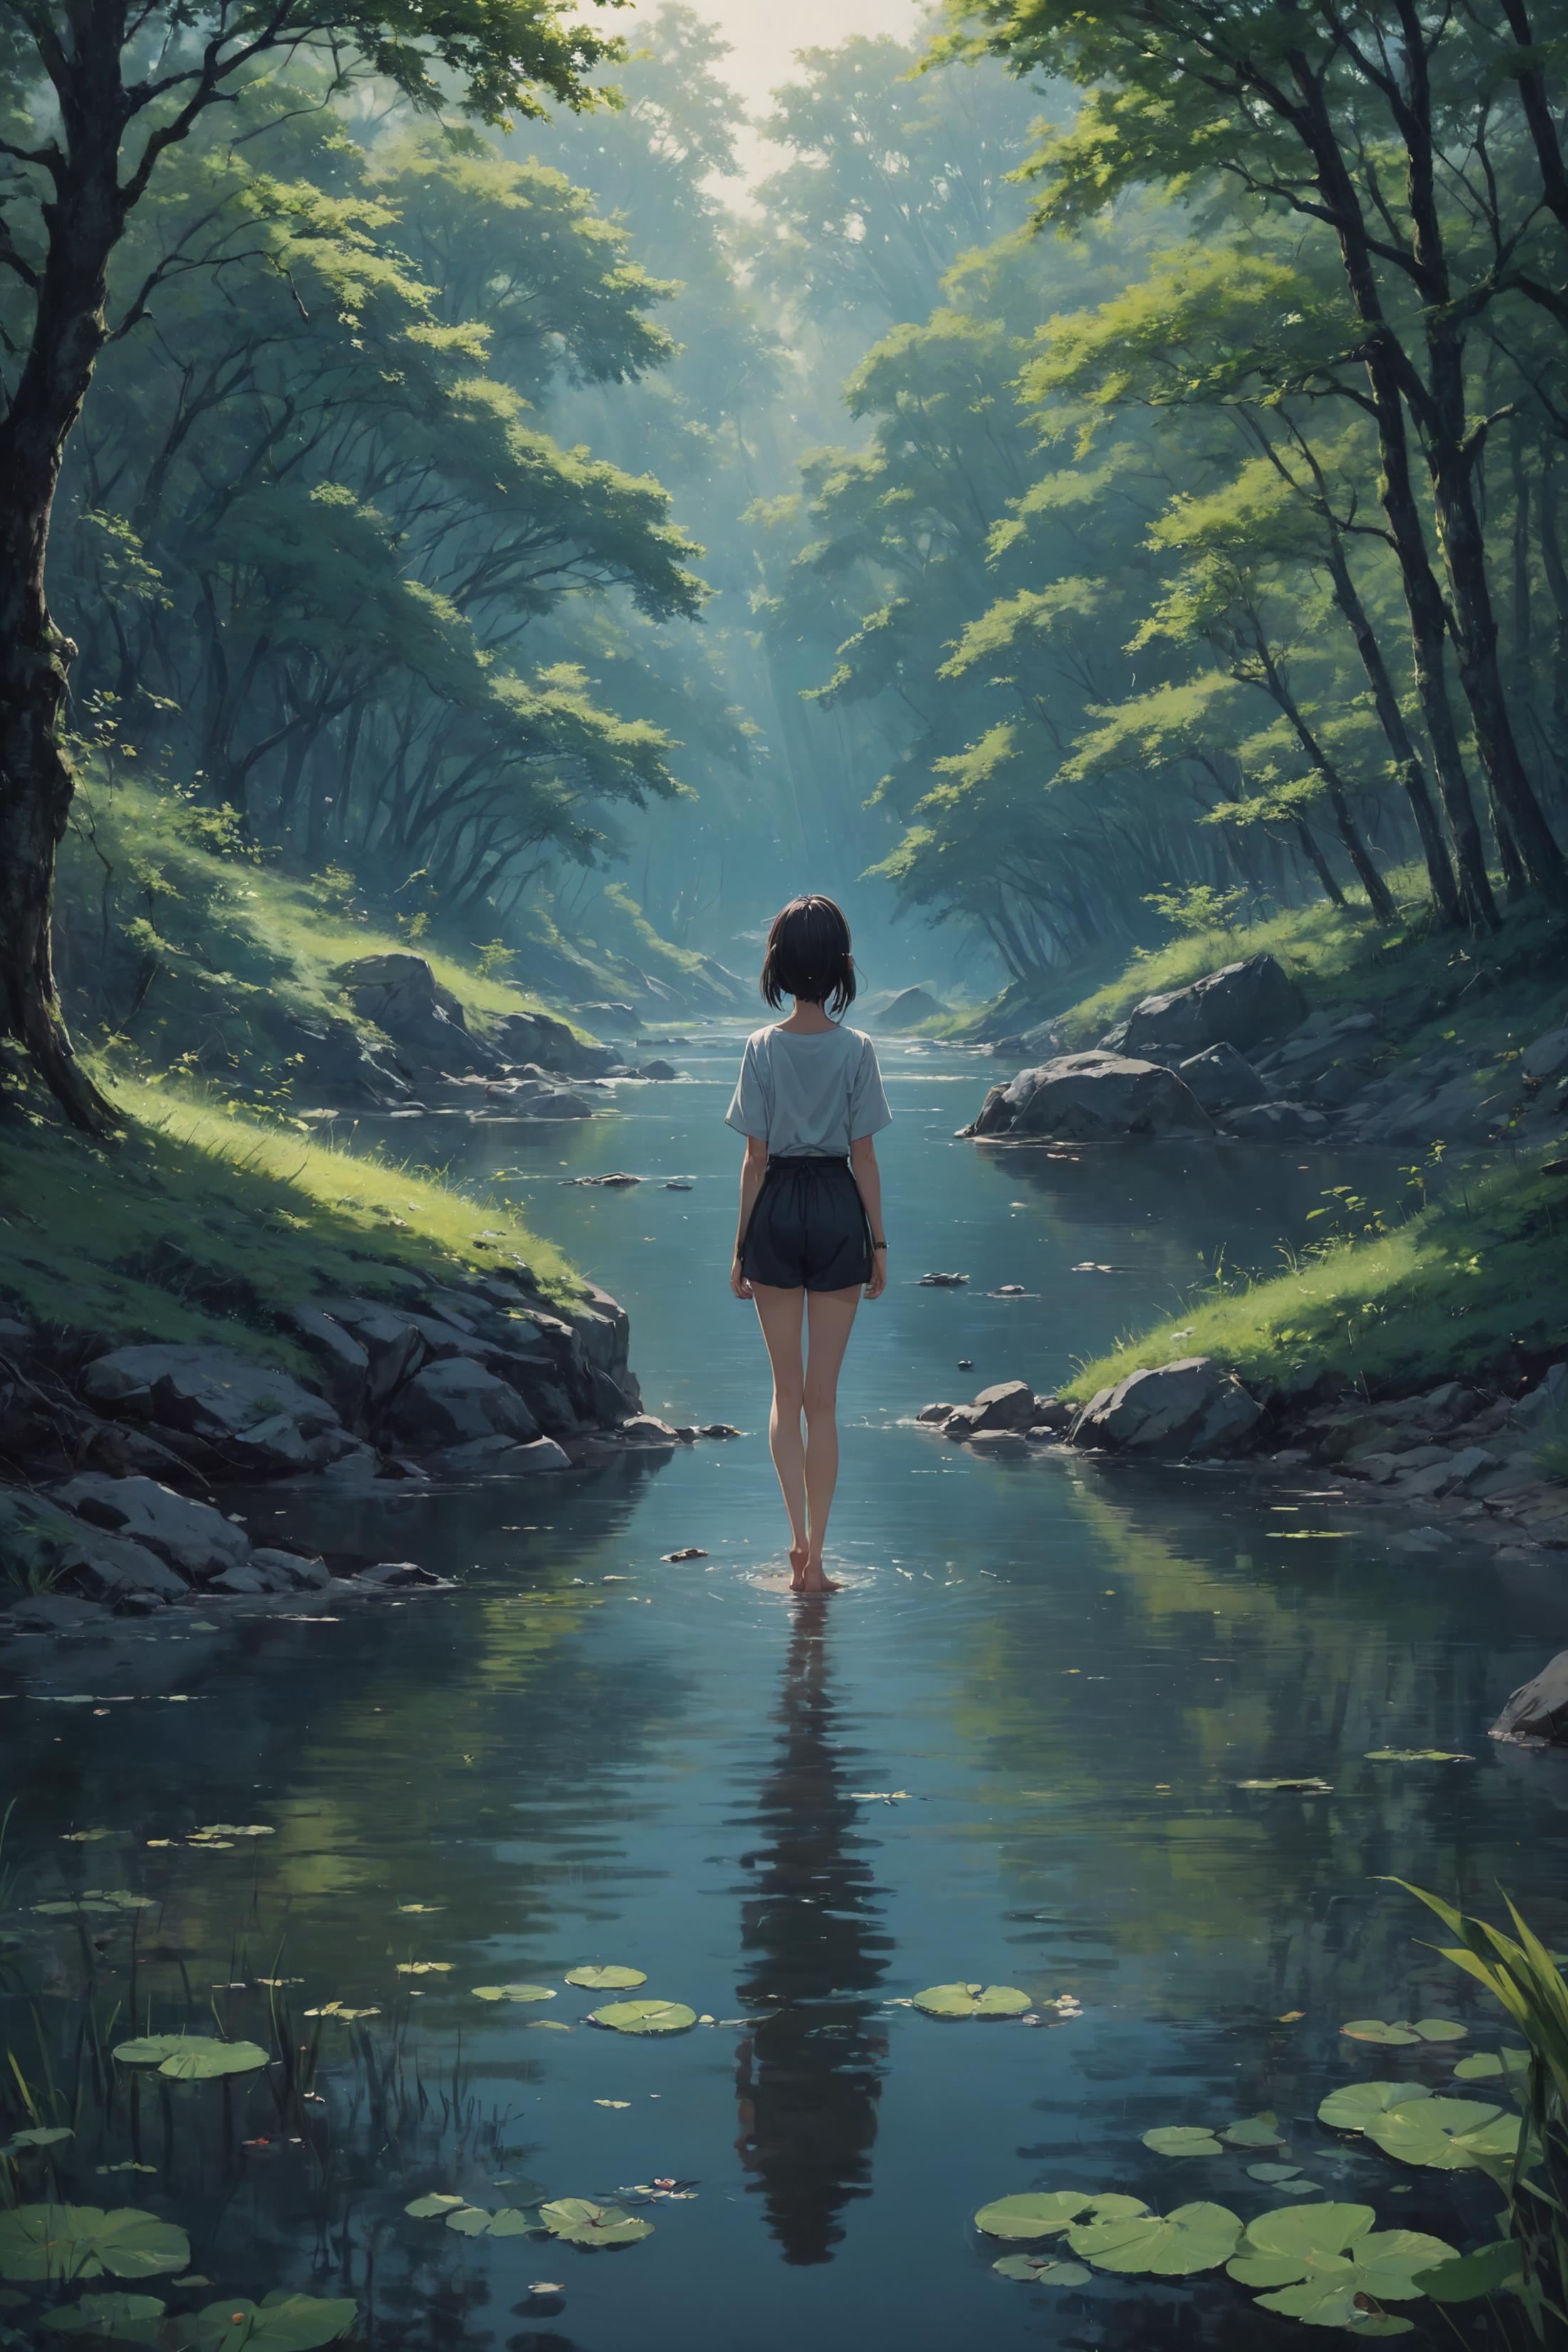 A woman wearing a white shirt and shorts walking through a forest river.